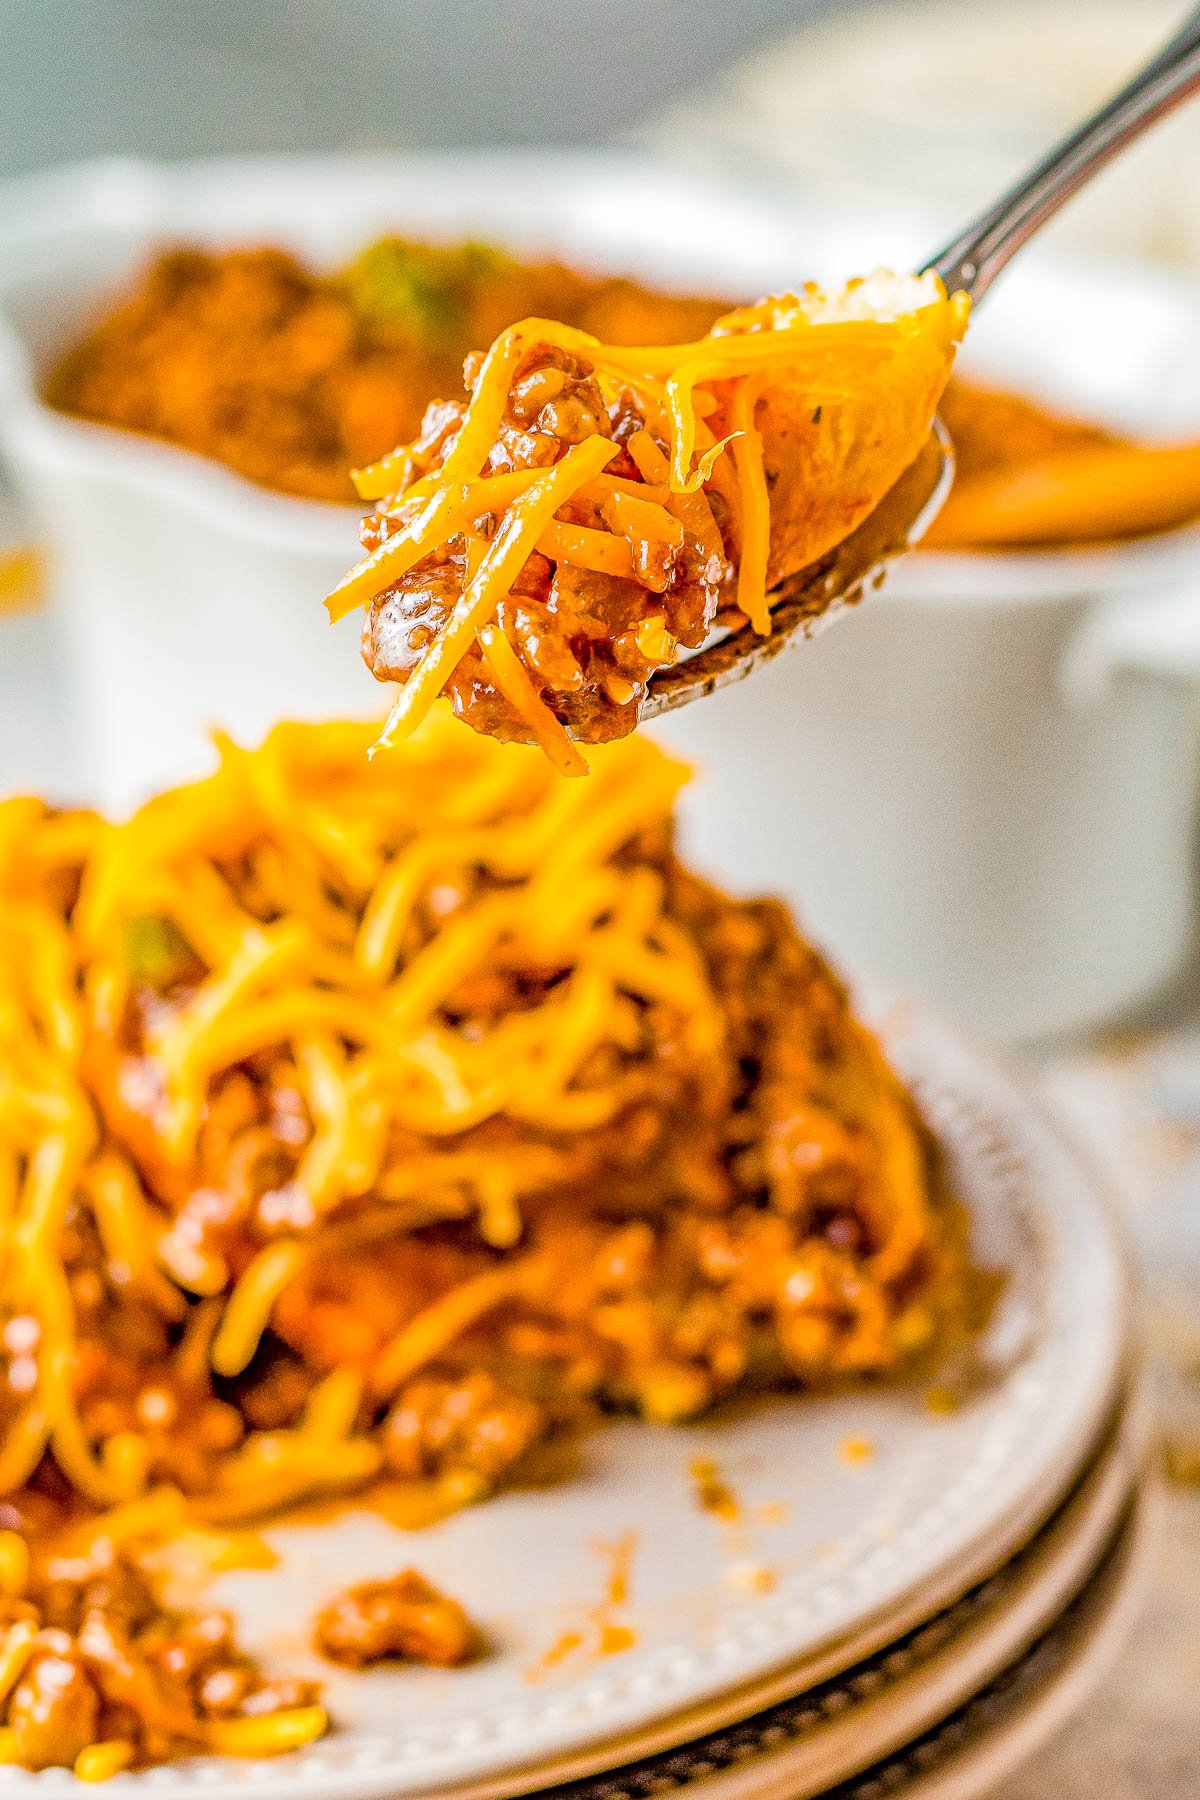 Slow Cooker Cheesy Sloppy Joes - Homemade sloppy Joes just got even better because they're cheesy!The perfect combination of sweet, tangy, optional spiciness, and so juicy! Whether you want to prep them before work for an easy weeknight dinner that's waiting, serve them at a summer holiday party, or for tailgating or a game day event, they're a classic family FAVORITE recipe and so EASY! Stovetop directions also provided.